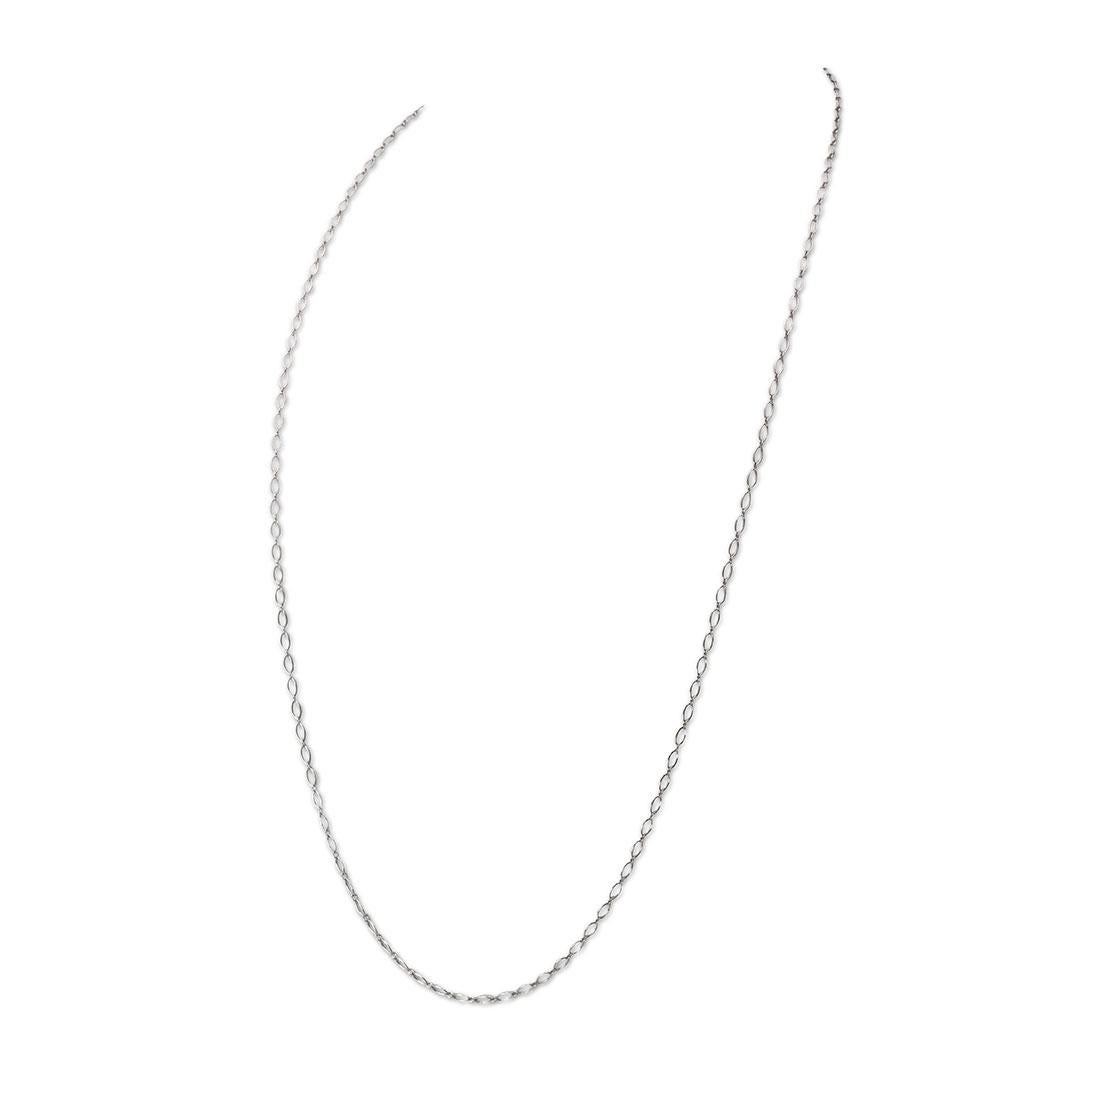 Authentic Tiffany & Co. oval link chain crafted in 18 karat white gold. The fine oval links measure 2.7mm in width and are connected by small round links. The chain measures 30 1/2 inches in length. Signed Tiffany & Co., 750. Necklace is presented